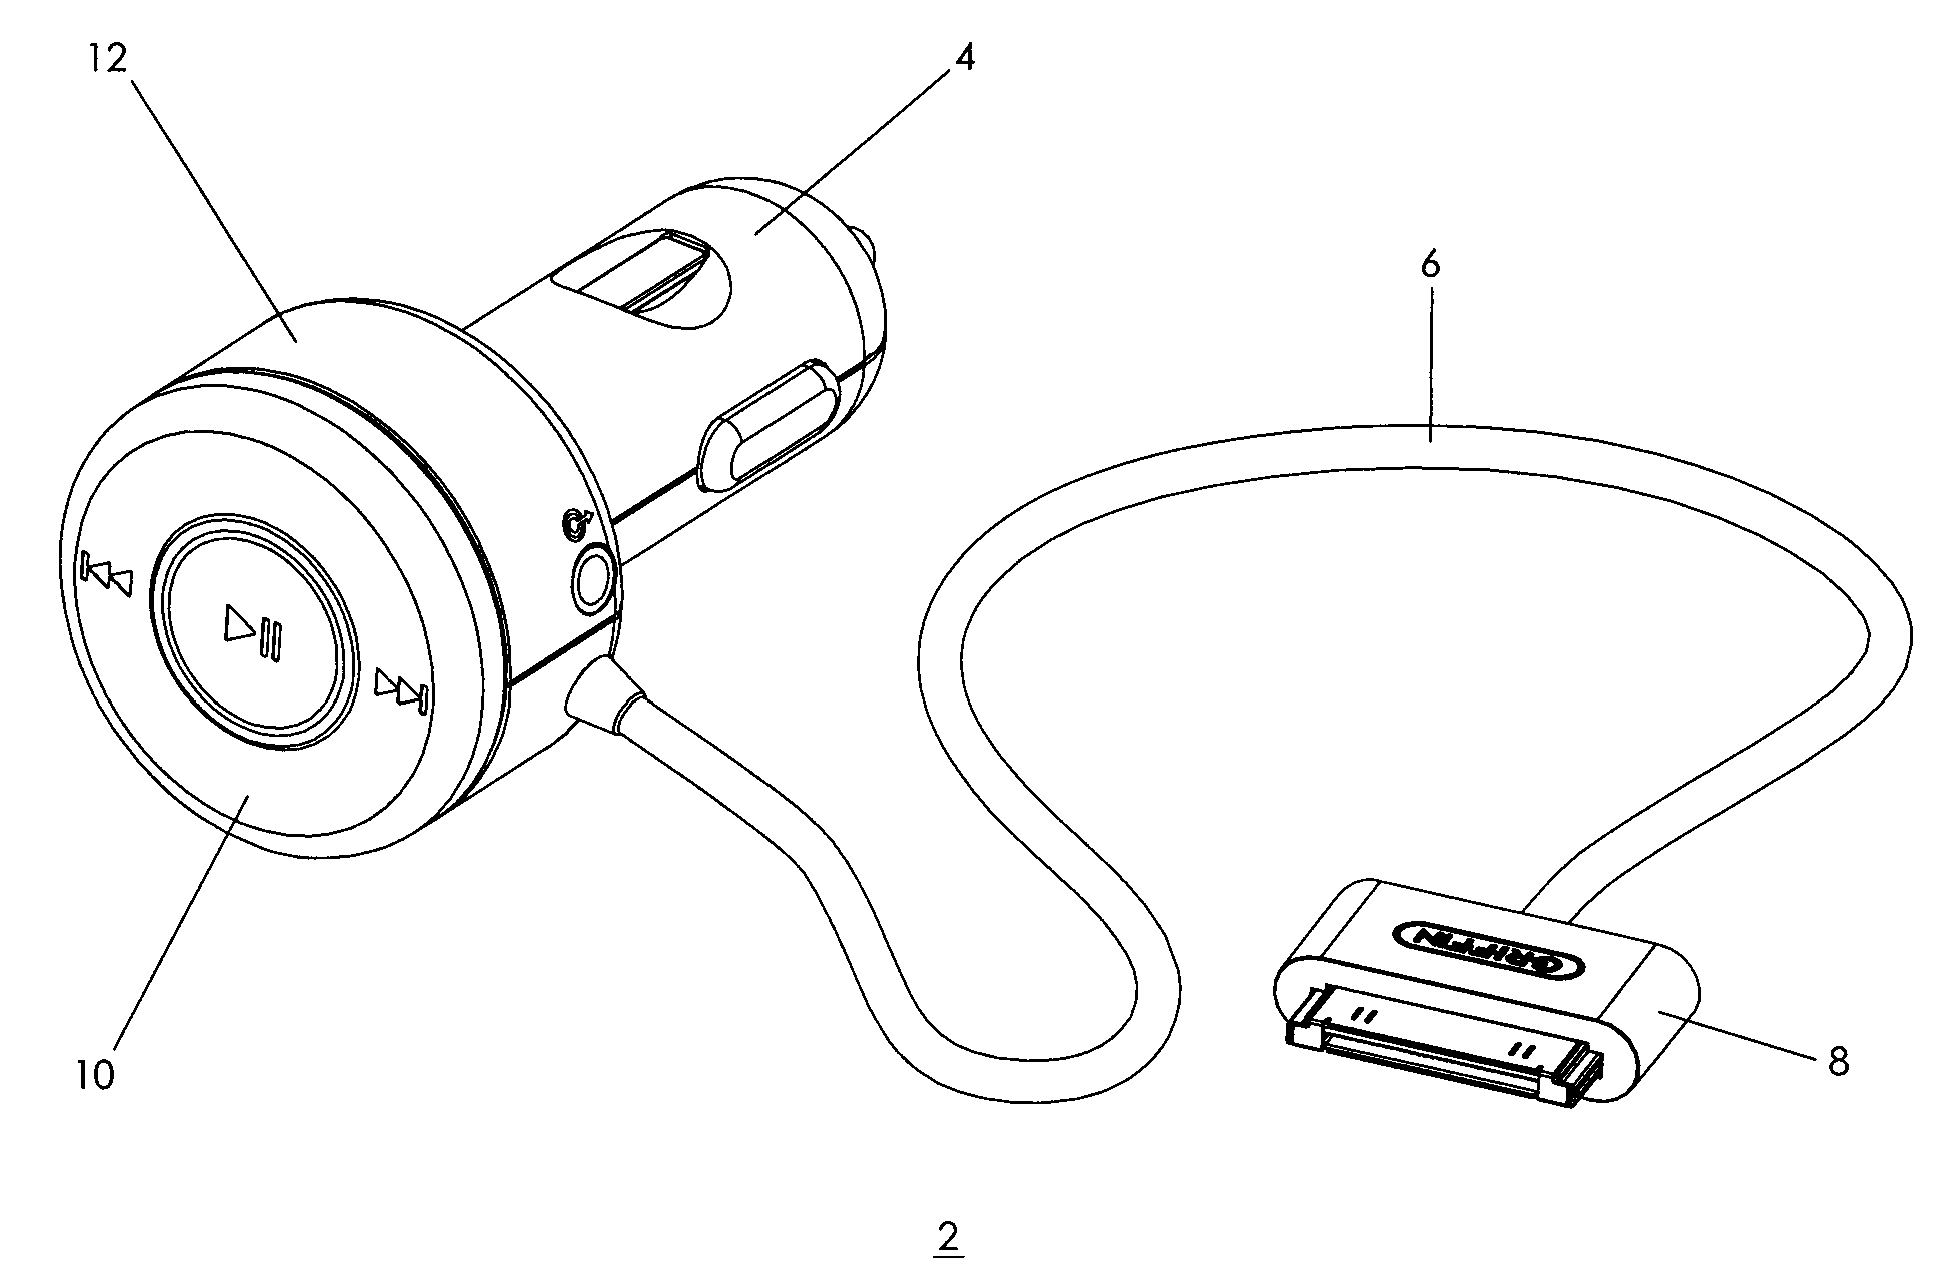 Auxiliary power adapter having device controls